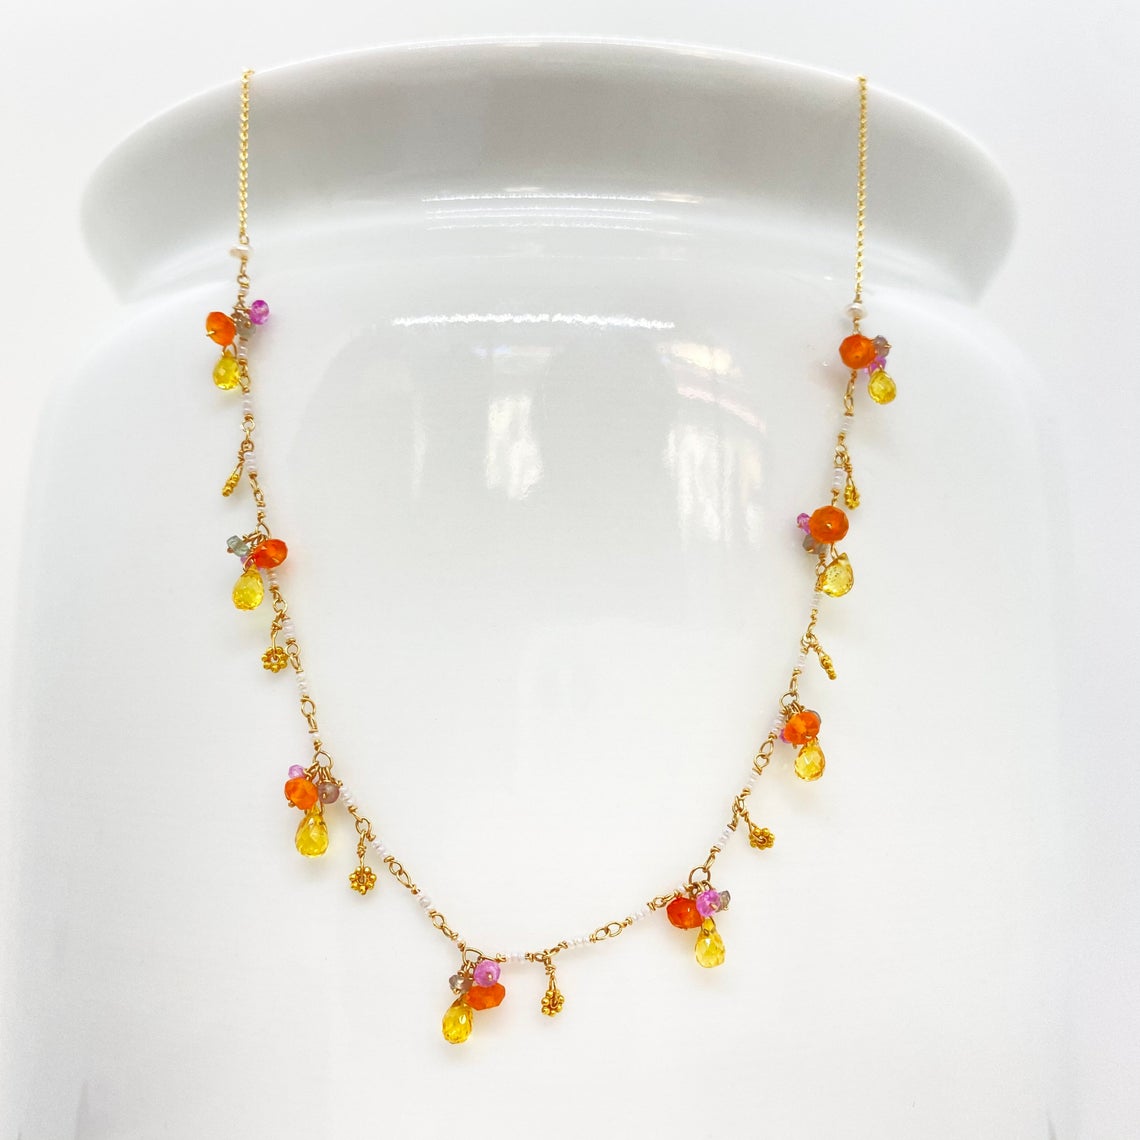 14k Gold Chain Necklace w/ Yellow Sapphire, Carnelian, Pink Sapphire, Antique Italian Beads, 18k Gold Daisies & Freshwater Pearls